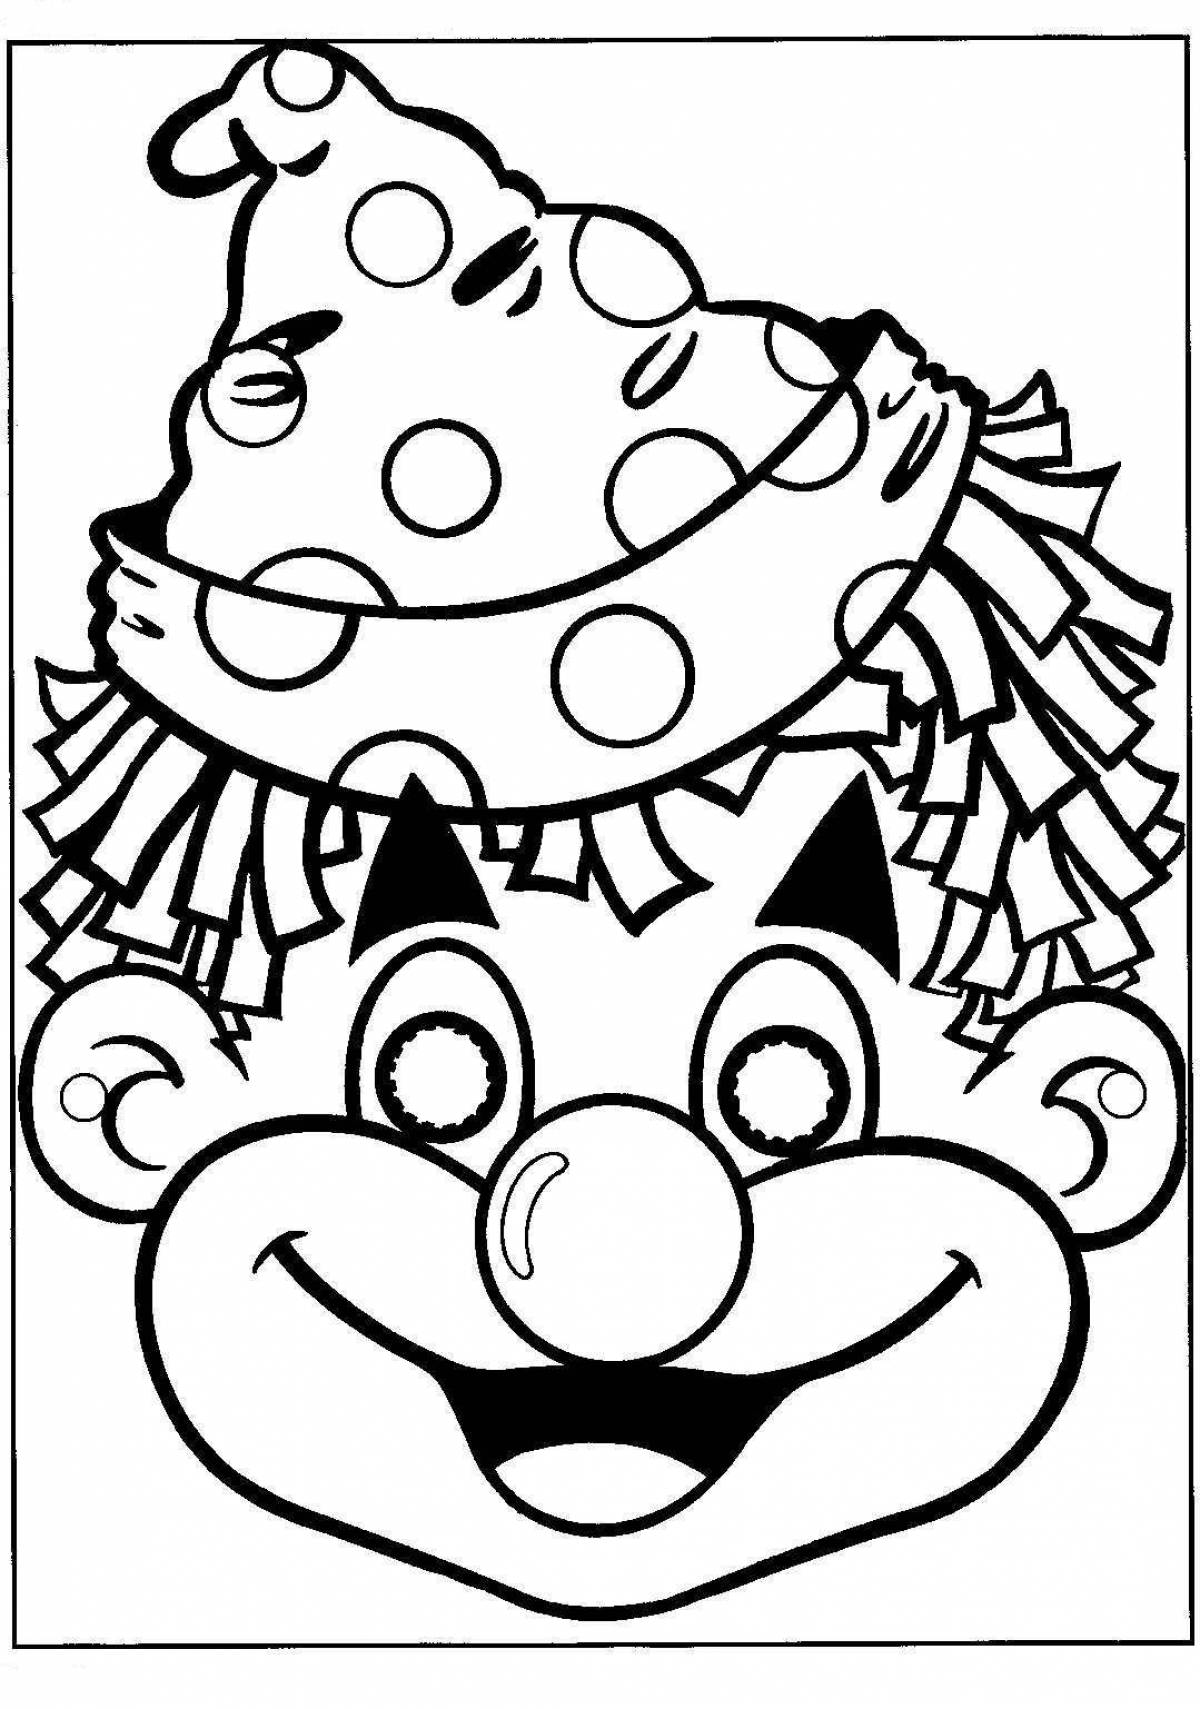 Live clown mask coloring book